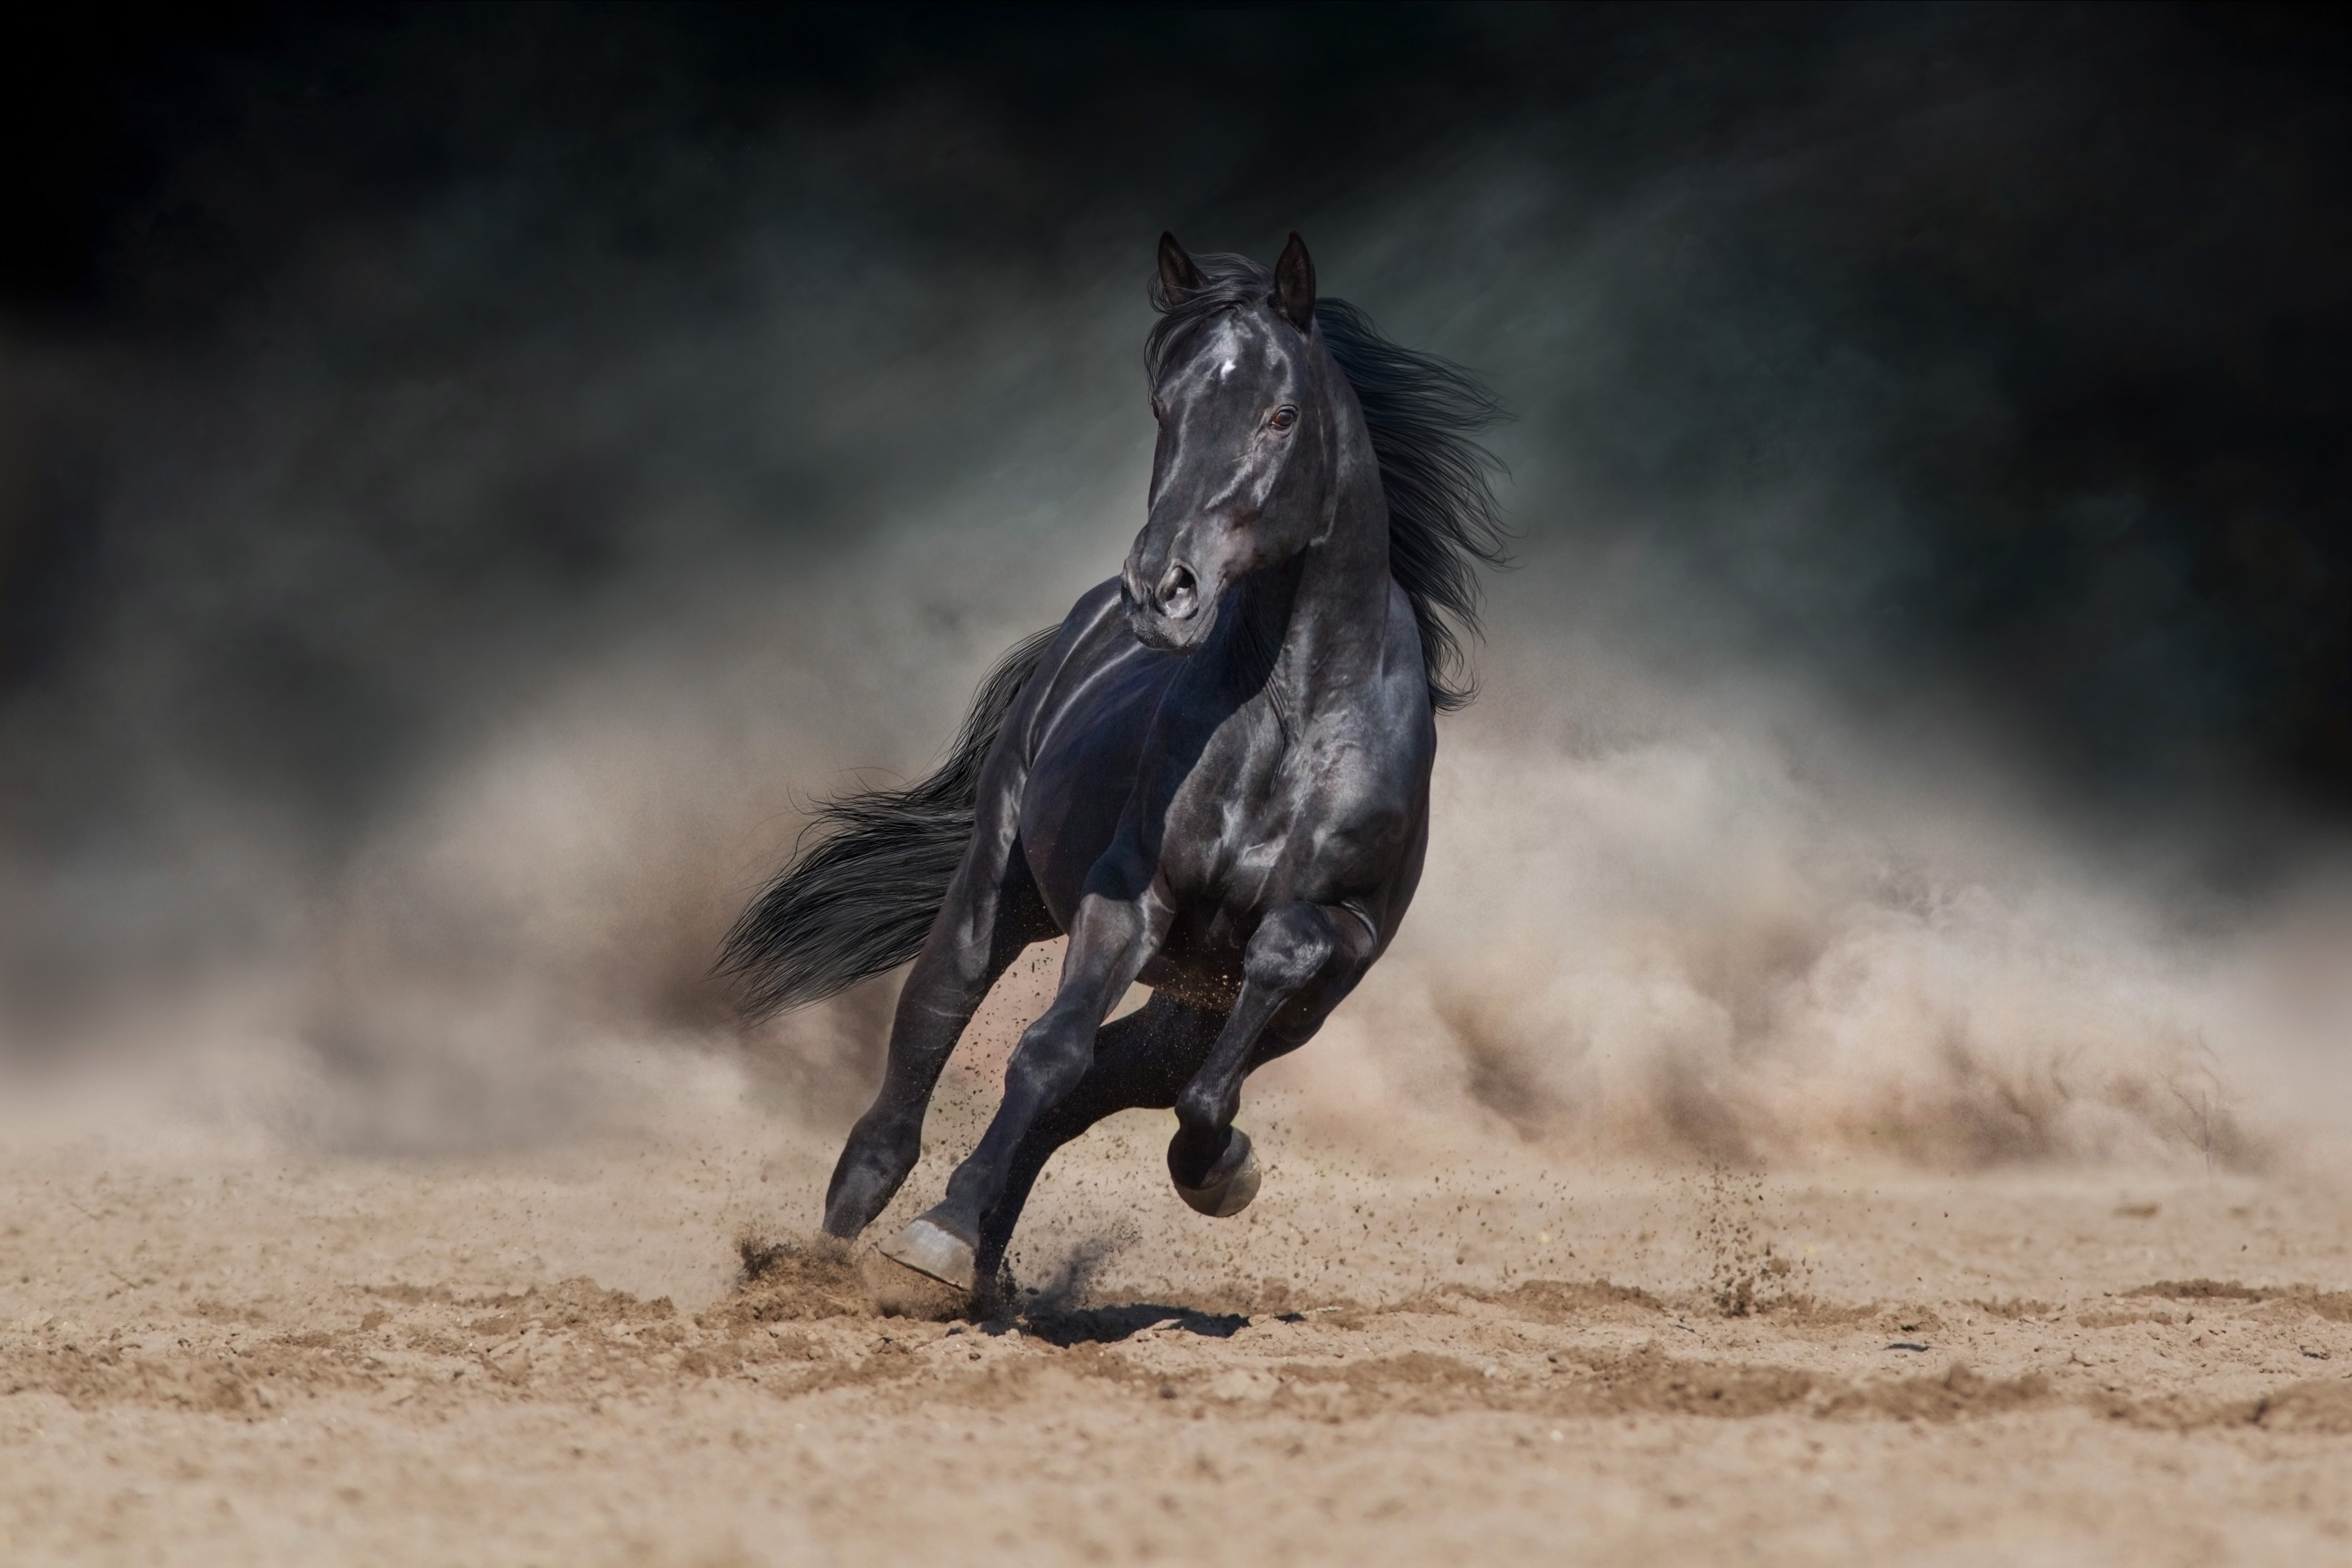 A black horse running on a sandy surface